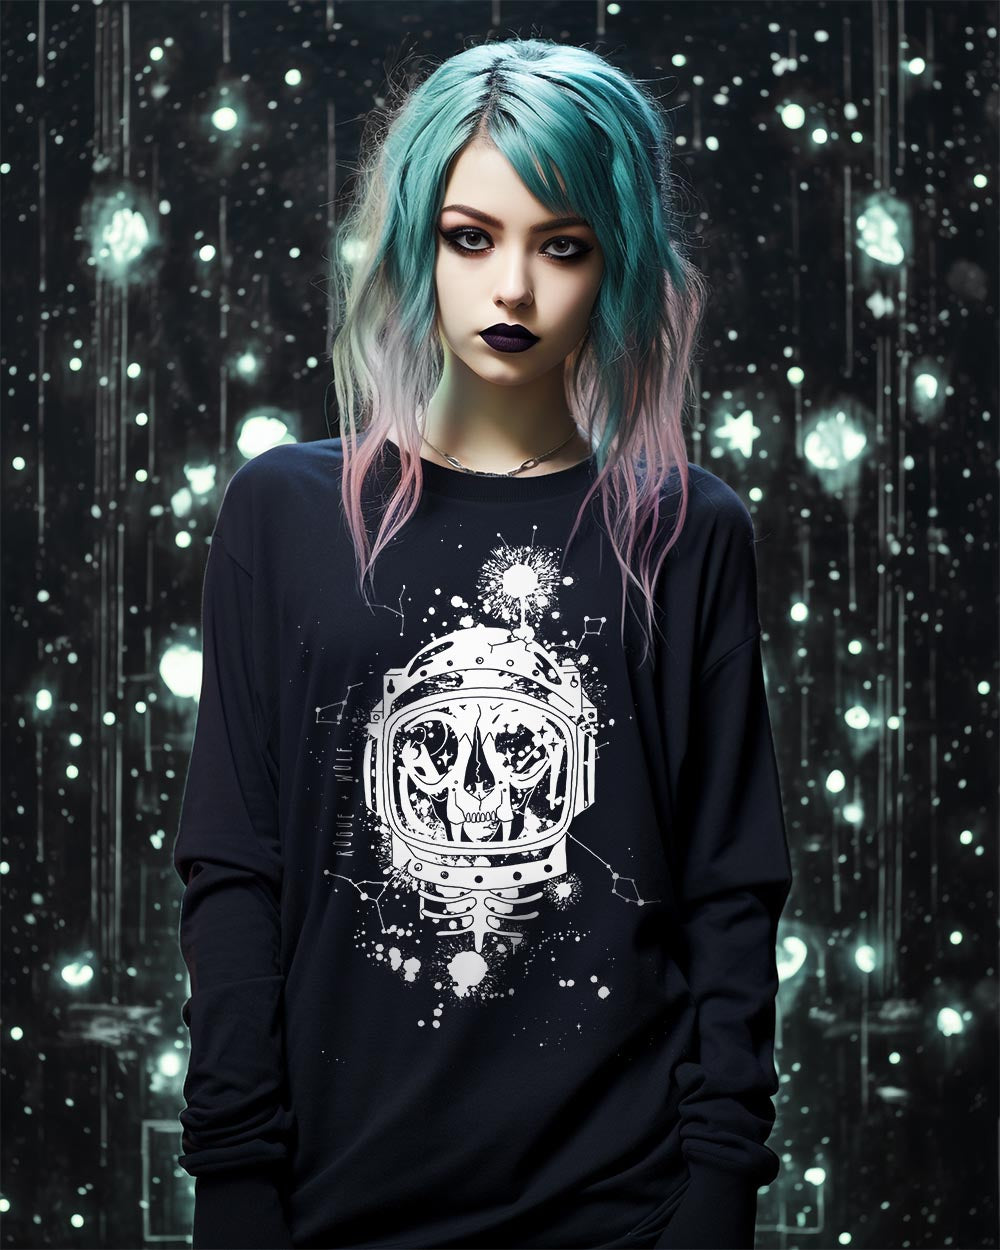 Cat-Astro-Phy Long Sleeve Tee - Unisex & Vegan Alt Goth Cyberpunk Top Grunge Aesthetic Fashion Cool Gothic gifts